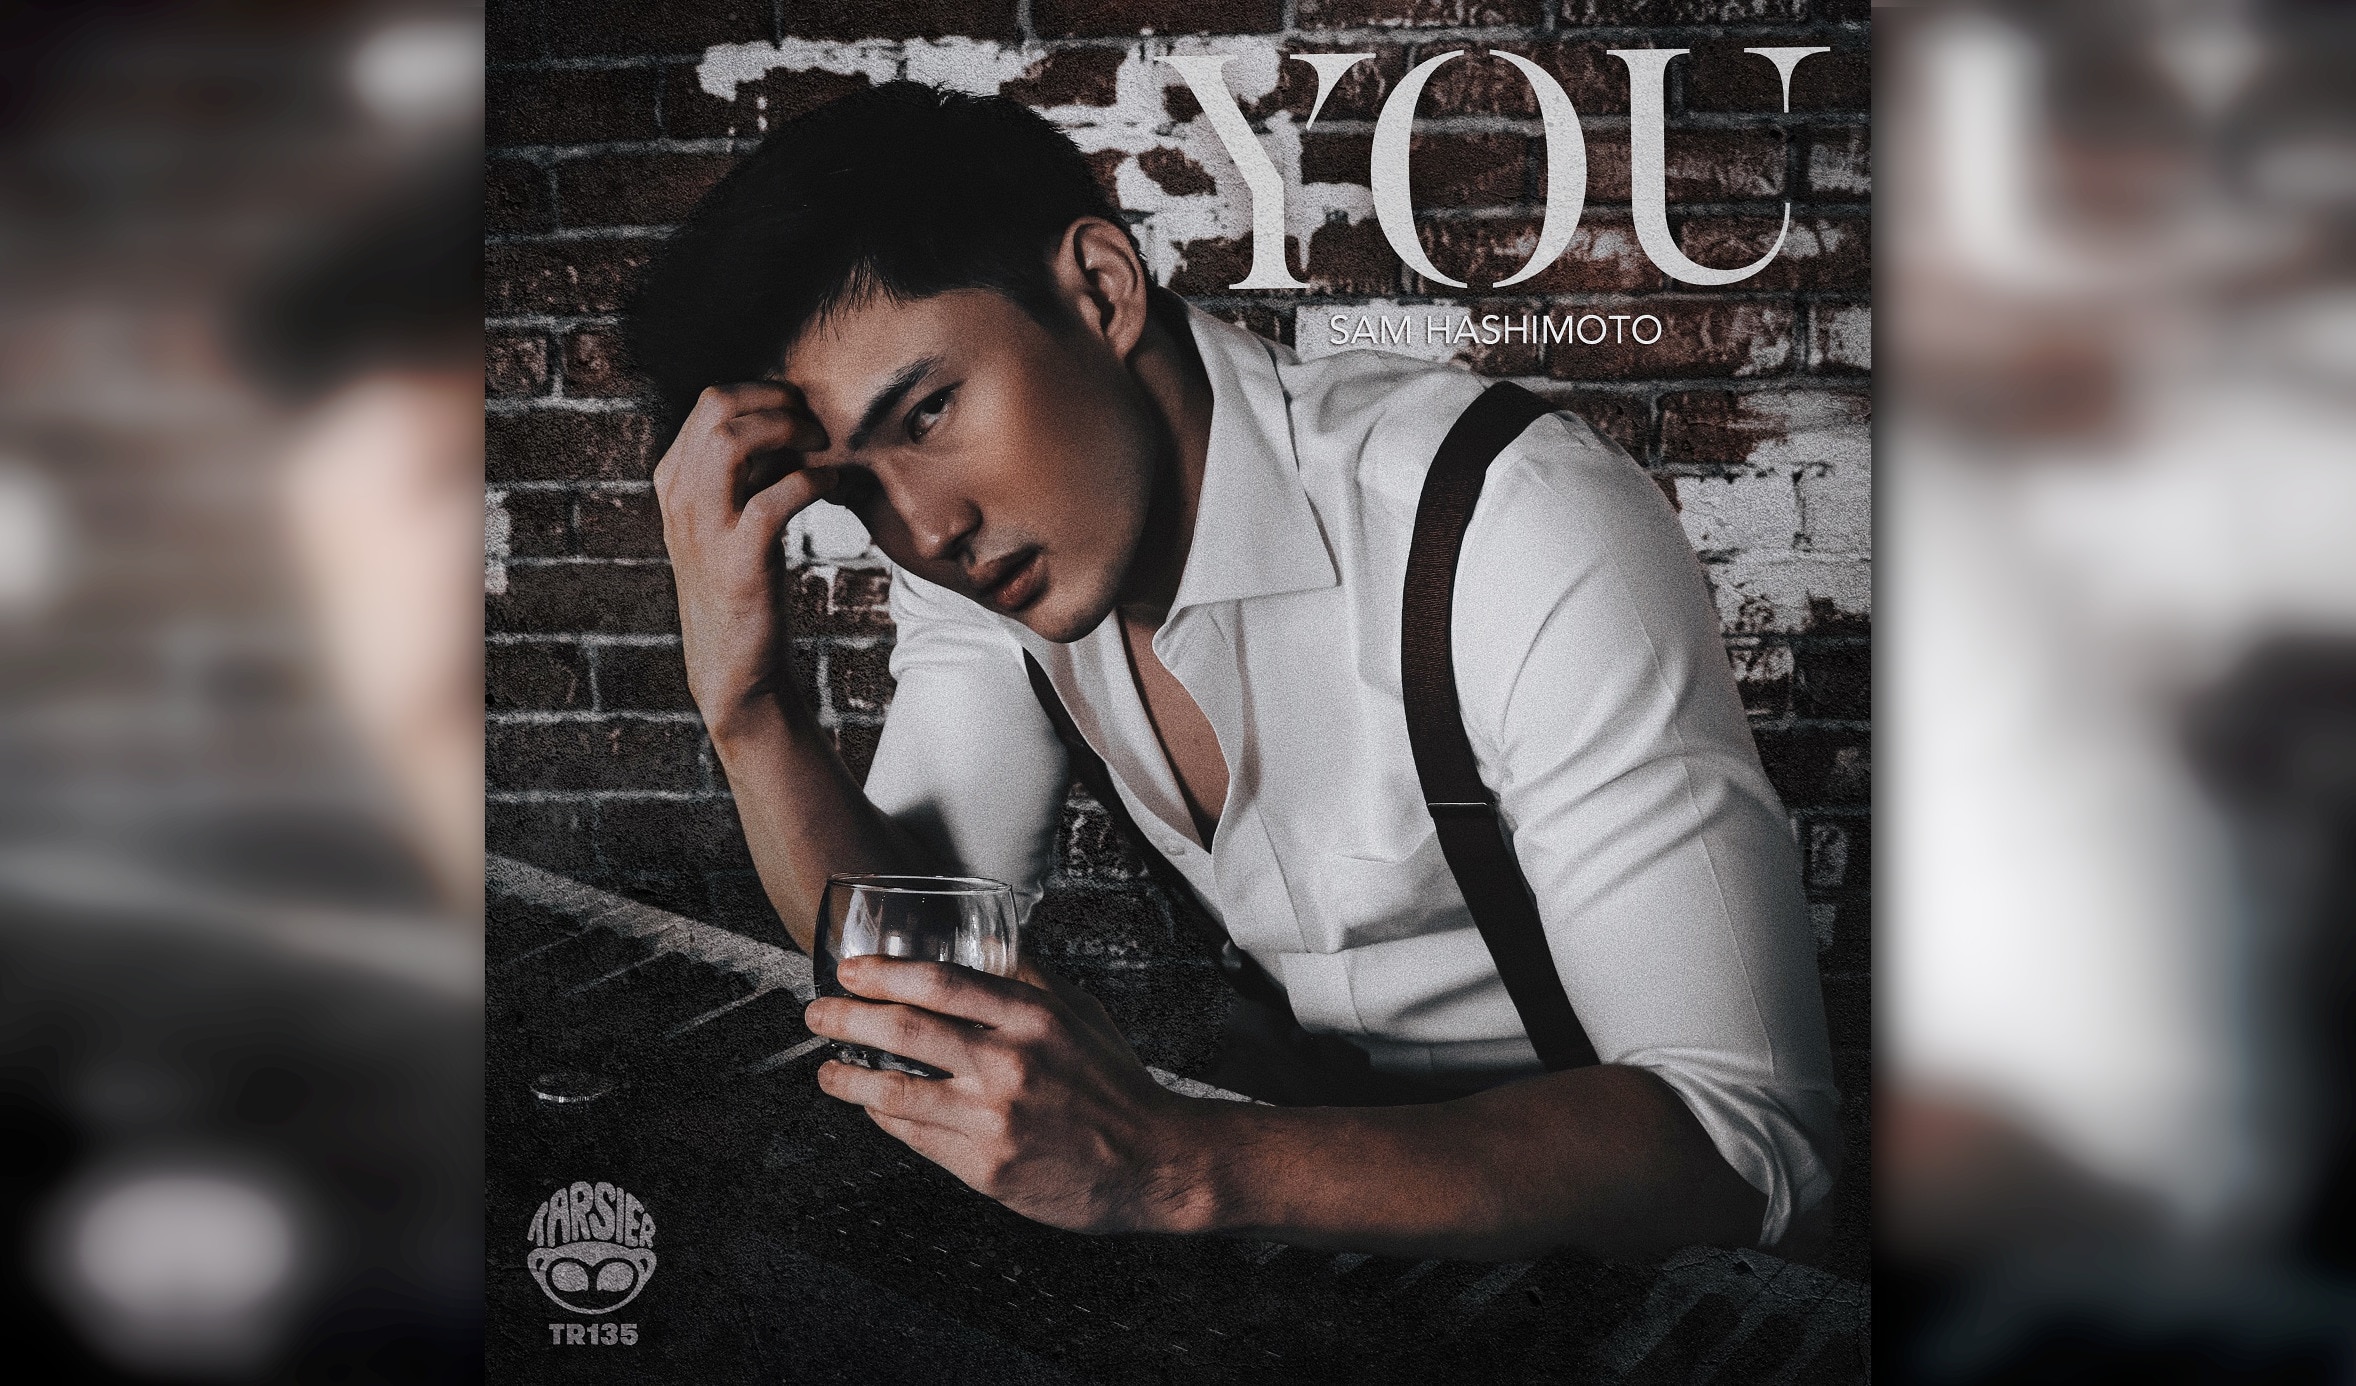 Sam Hashimoto exudes a tenor of hope with new single "You"